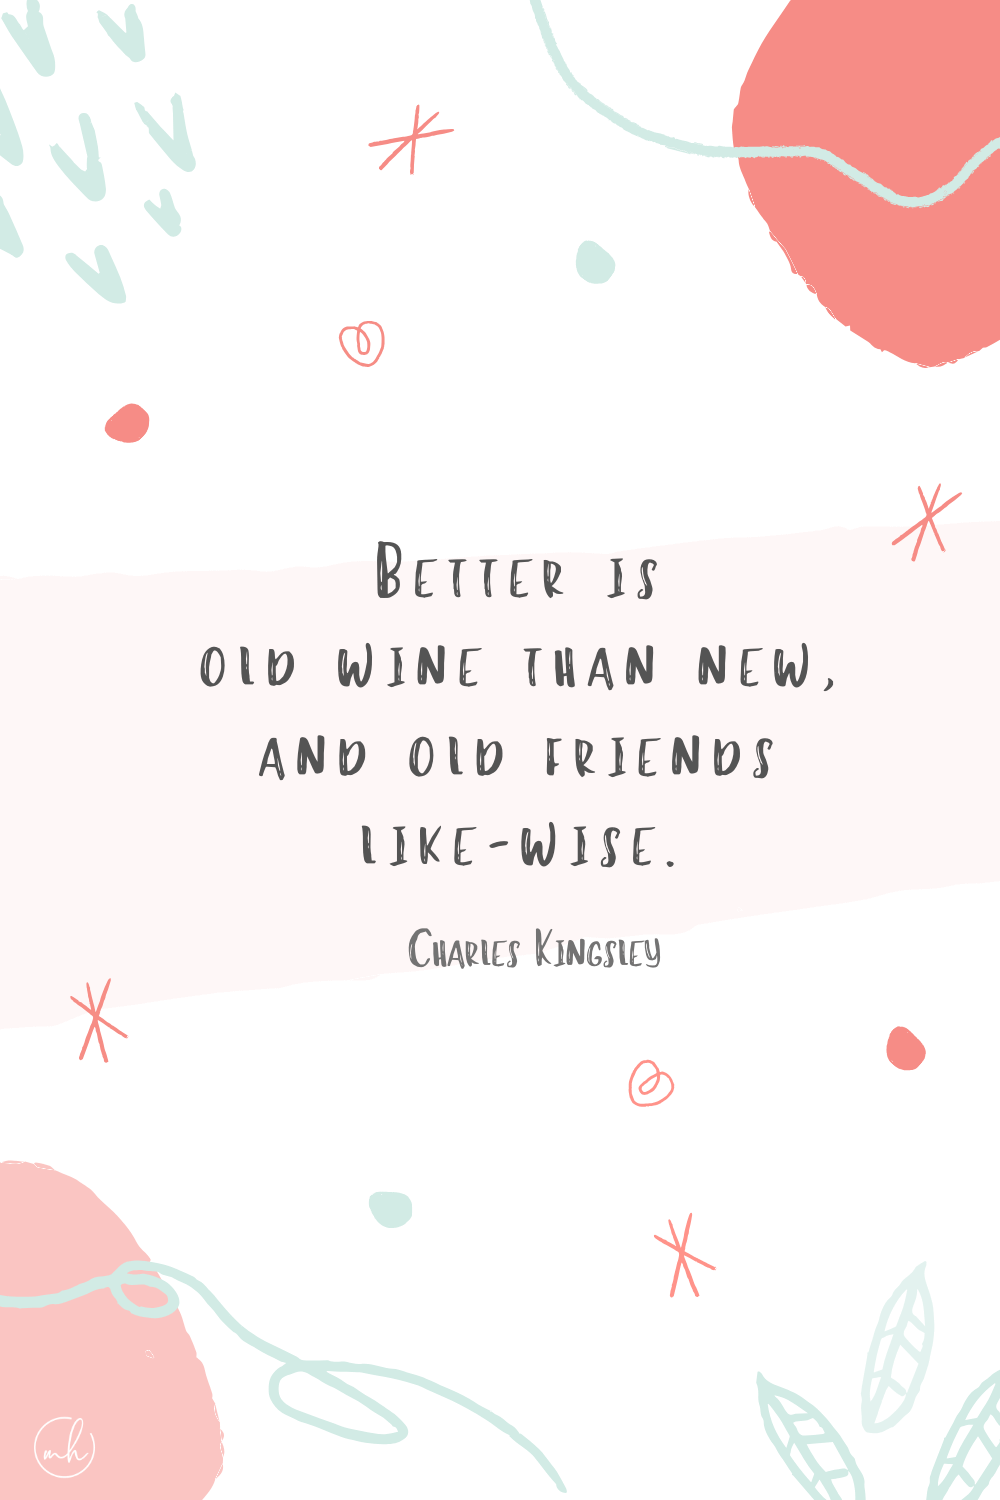 “Better is old wine than new, and old friends like-wise.” - Charles Kingsley